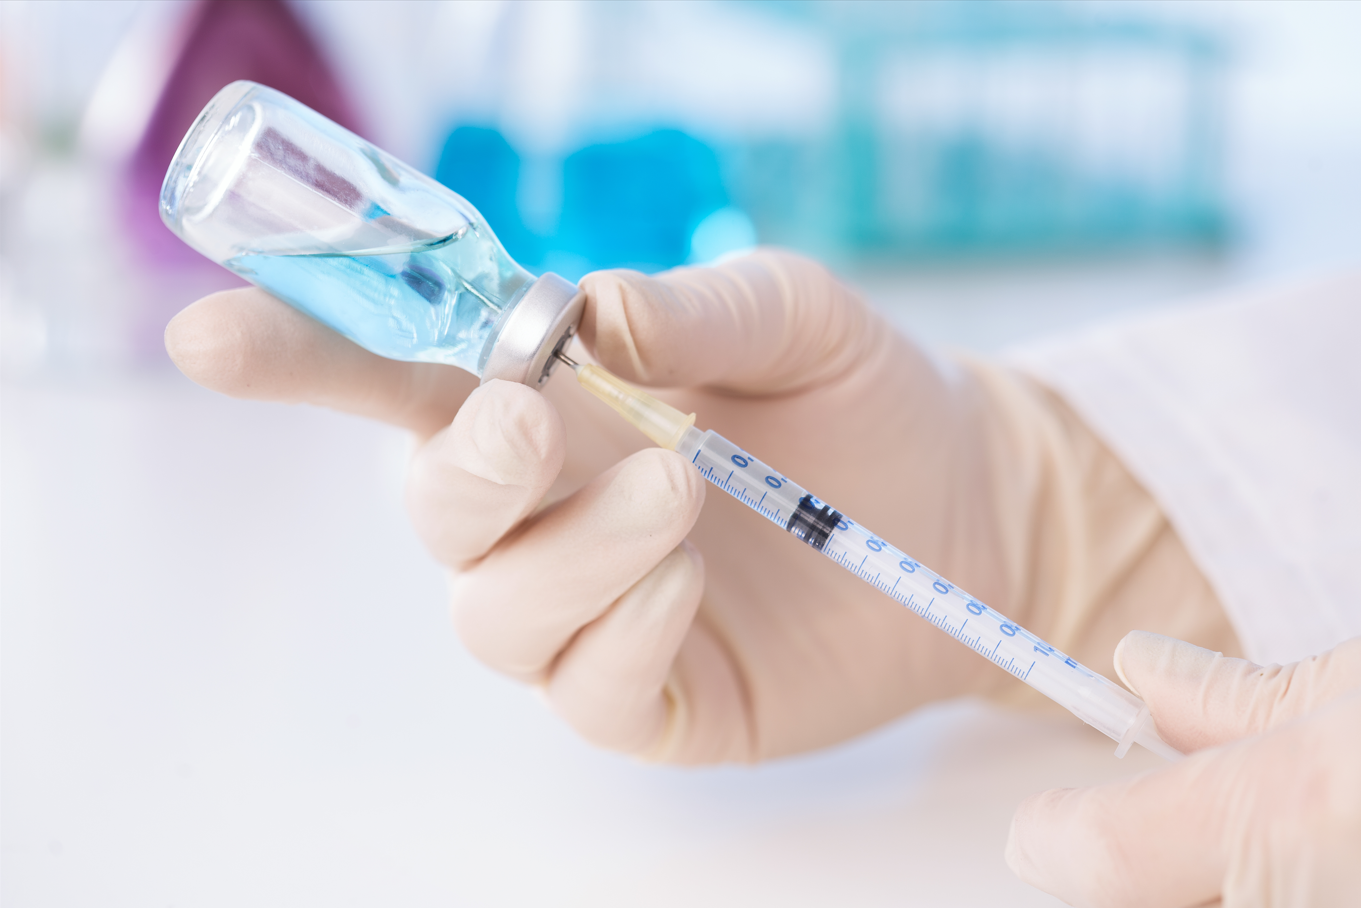 Trust the Science: Debunking COVID-19 Vaccine Myths